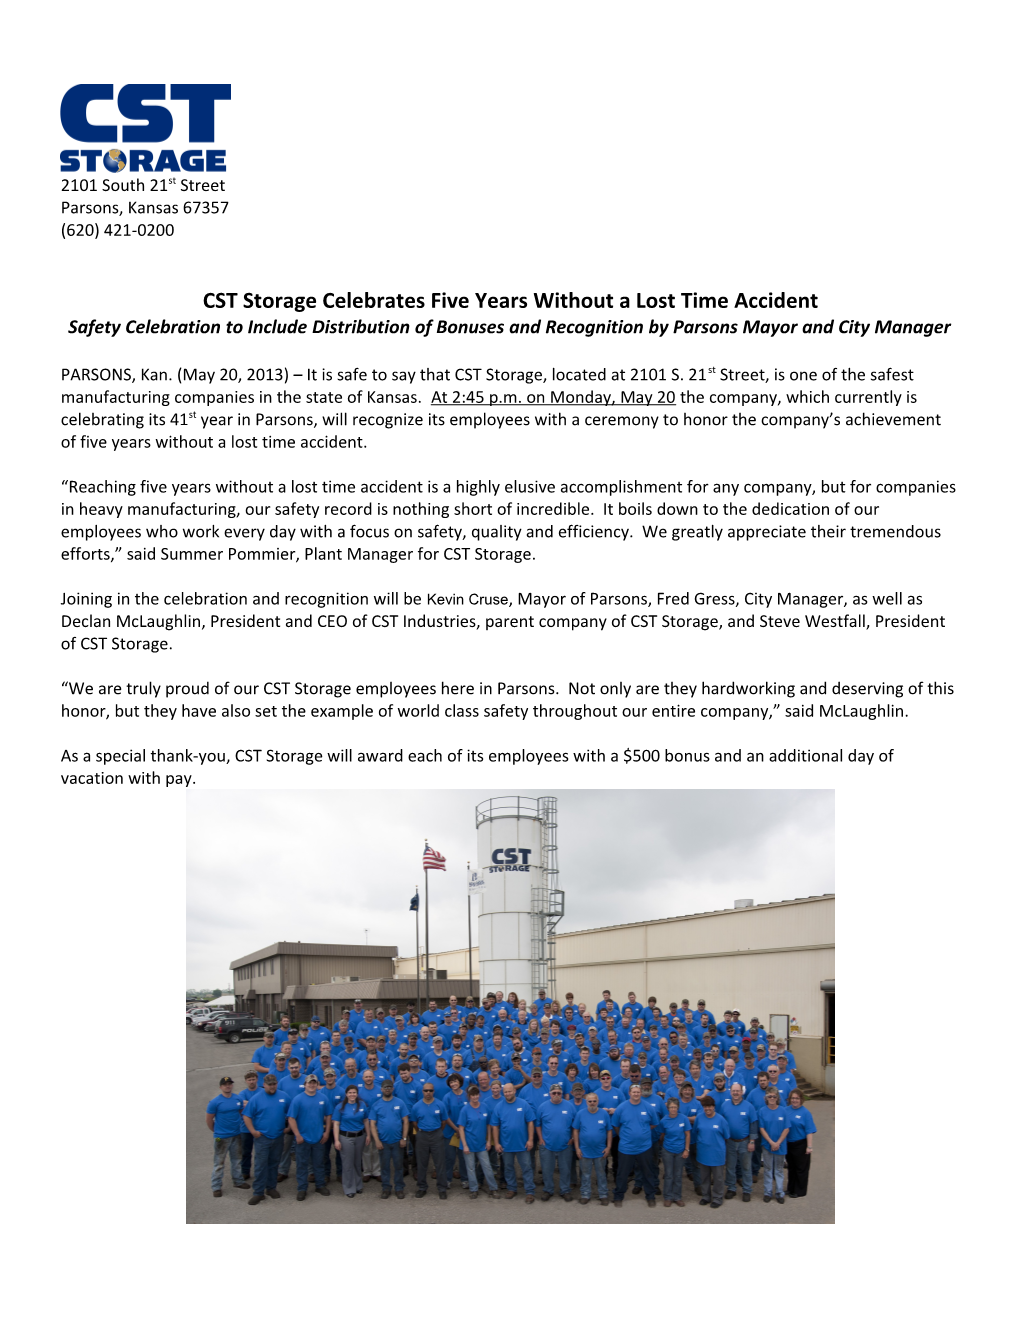 CST Storage Celebrates Five Years Without a Lost Time Accident